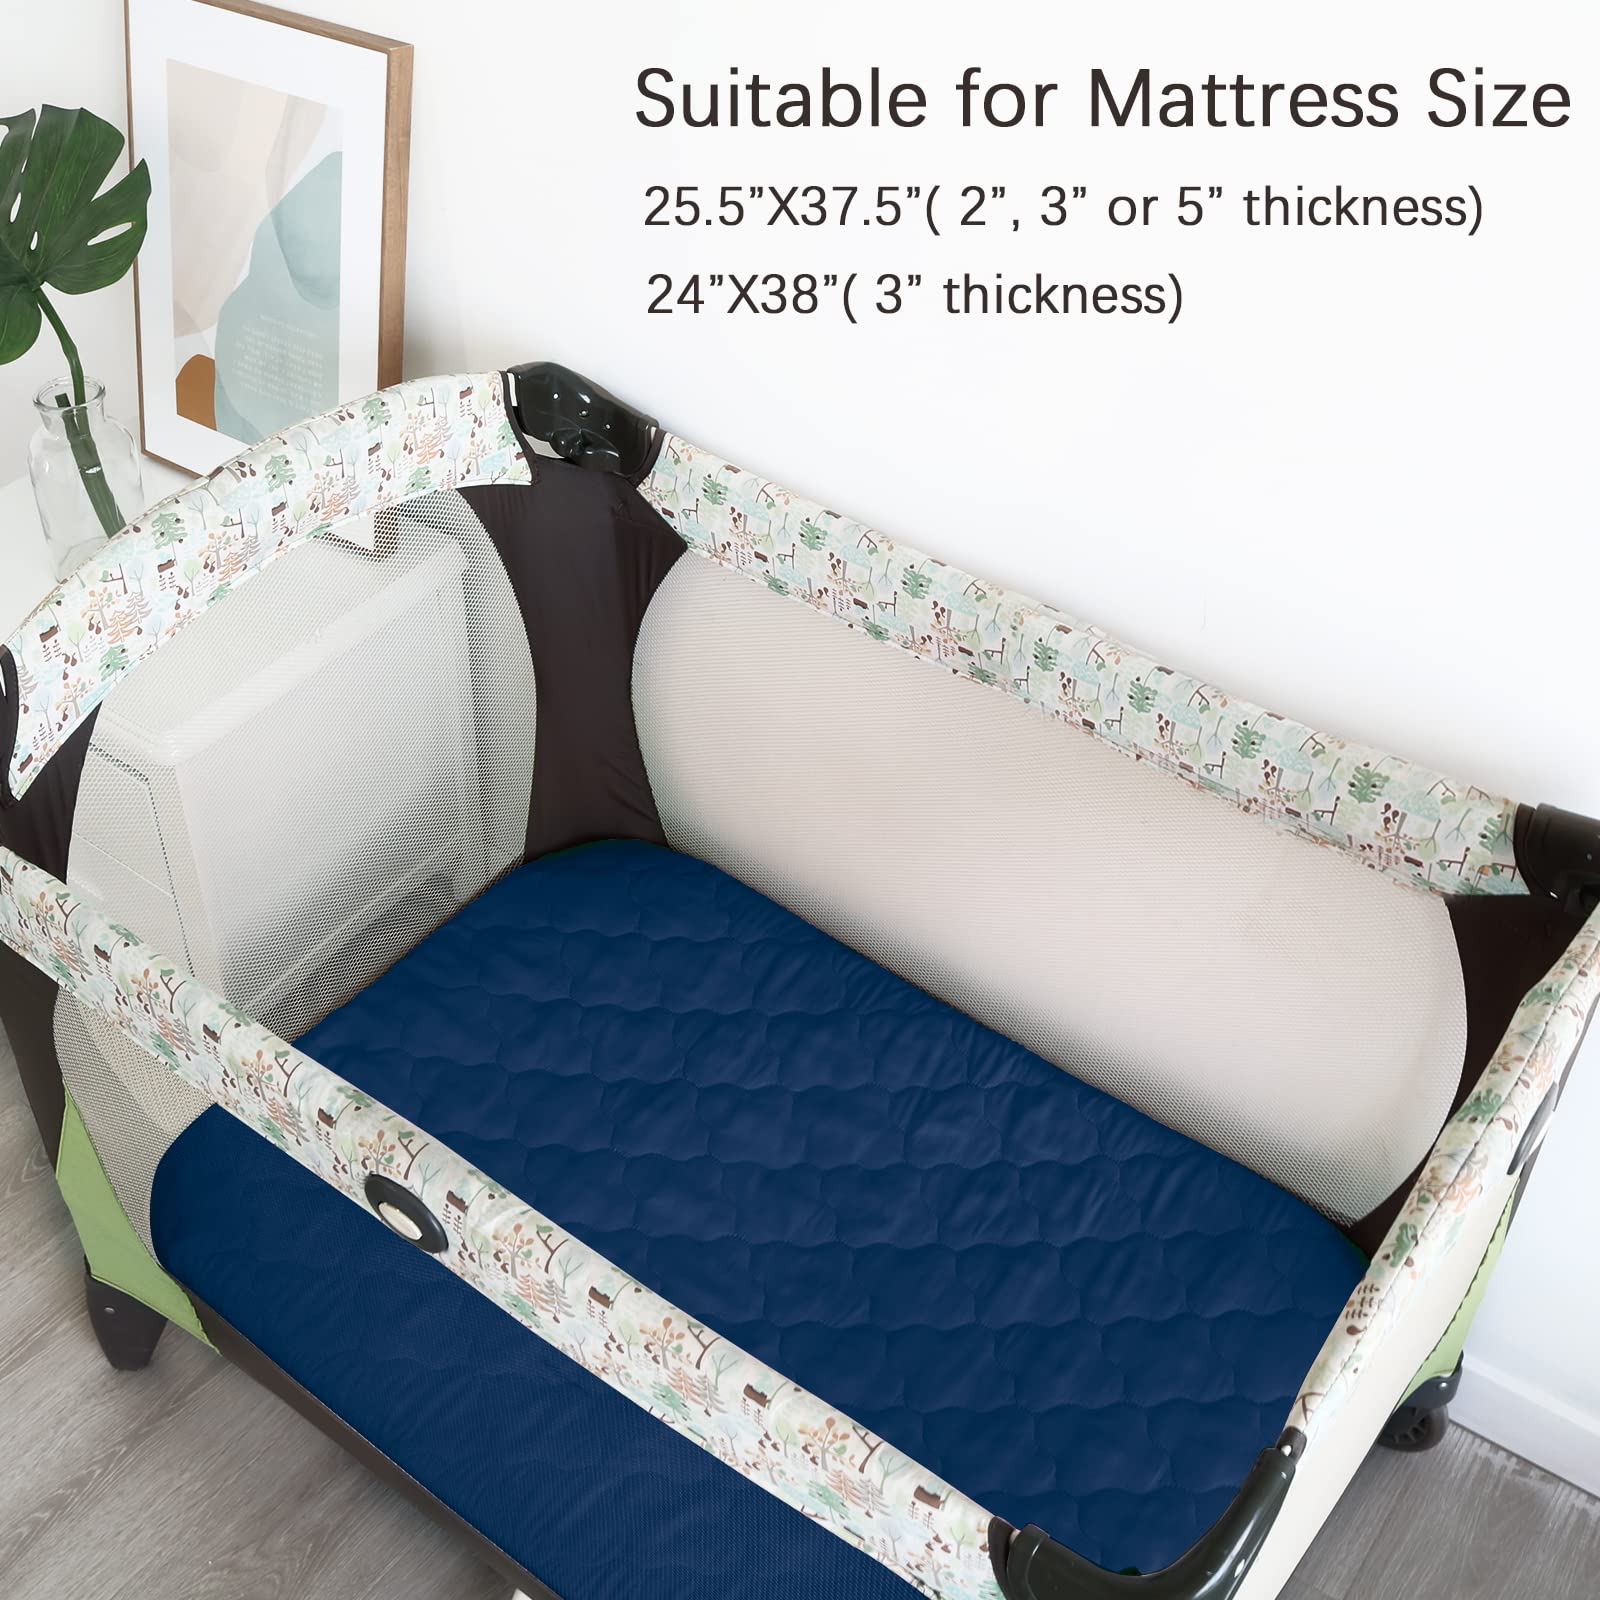 Pack and Play Sheets Fitted Quilted Waterproof Protector, 2 Pack Premium Compatible with Pack n Play Mattress Pad Cover fits for Baby Playpen Playard Mattress, Portable Mini Crib, Gray & Navy Blue